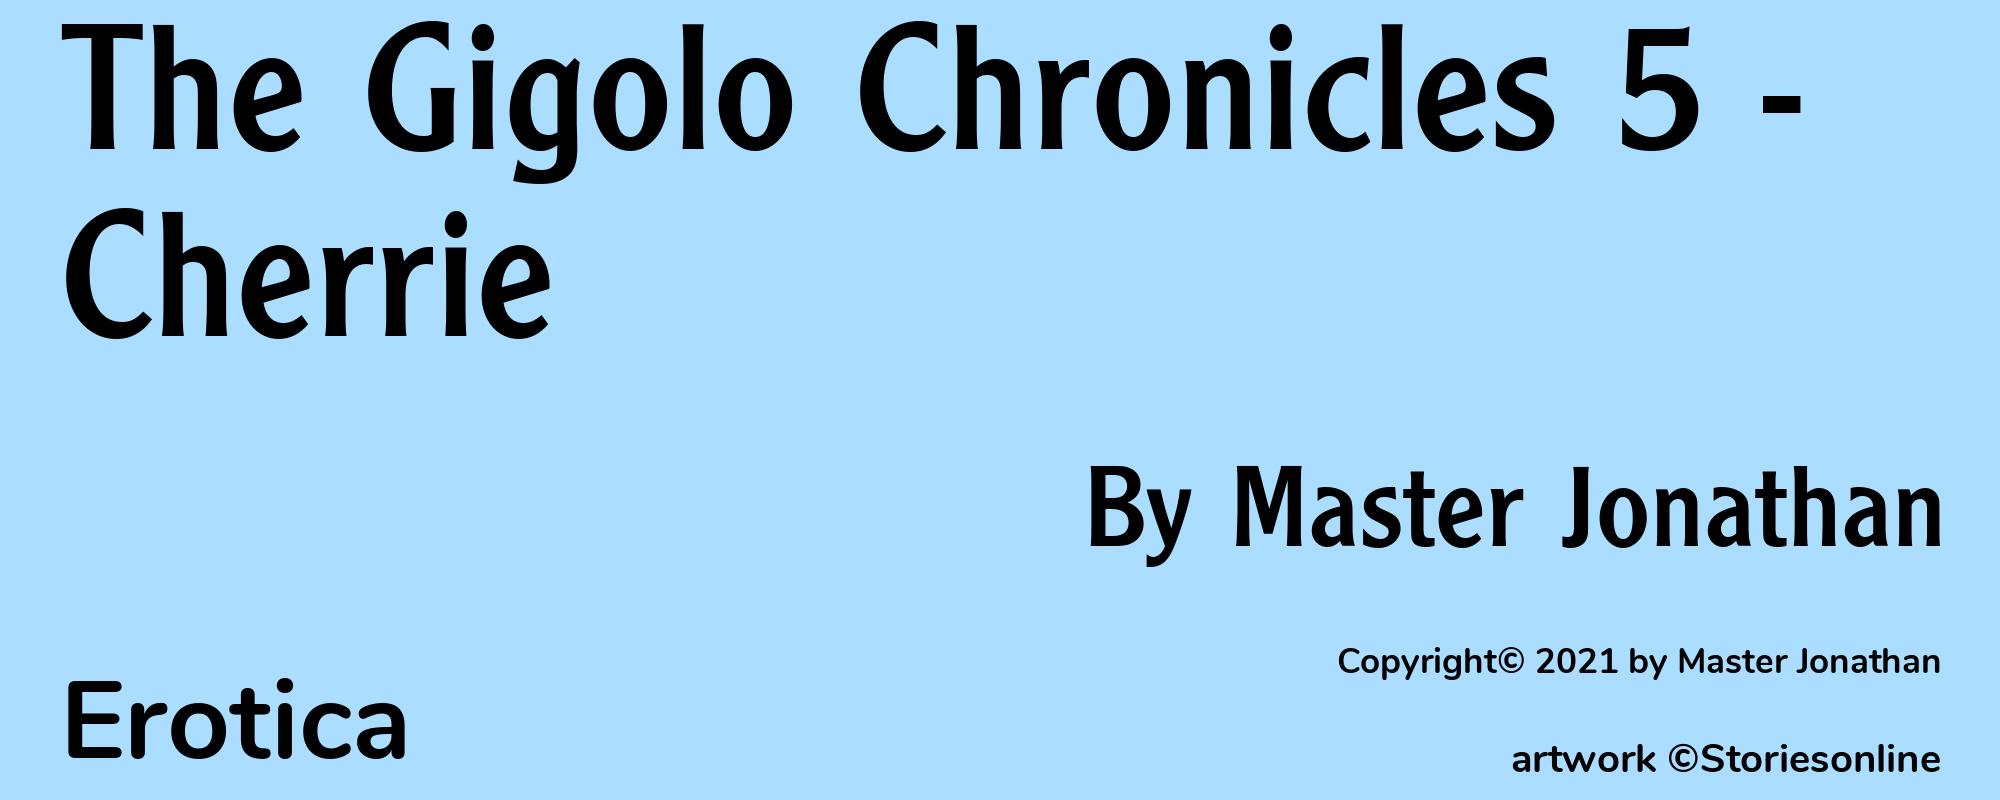 The Gigolo Chronicles 5 - Cherrie - Cover